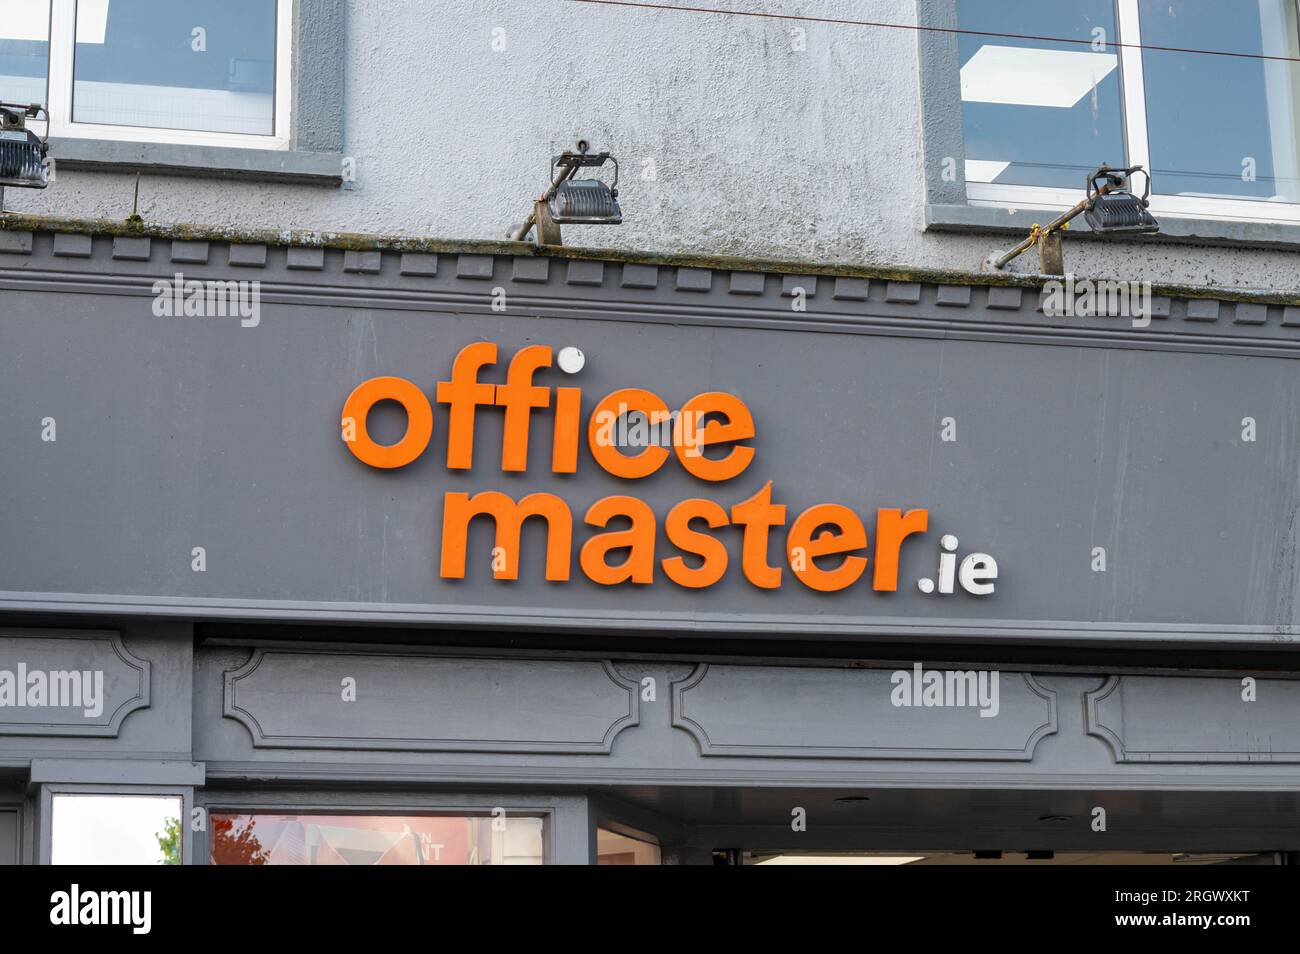 Waterford, Ireland- July 17, 2023: The sign for toffice master.ie store in Waterford Ireland Stock Photo